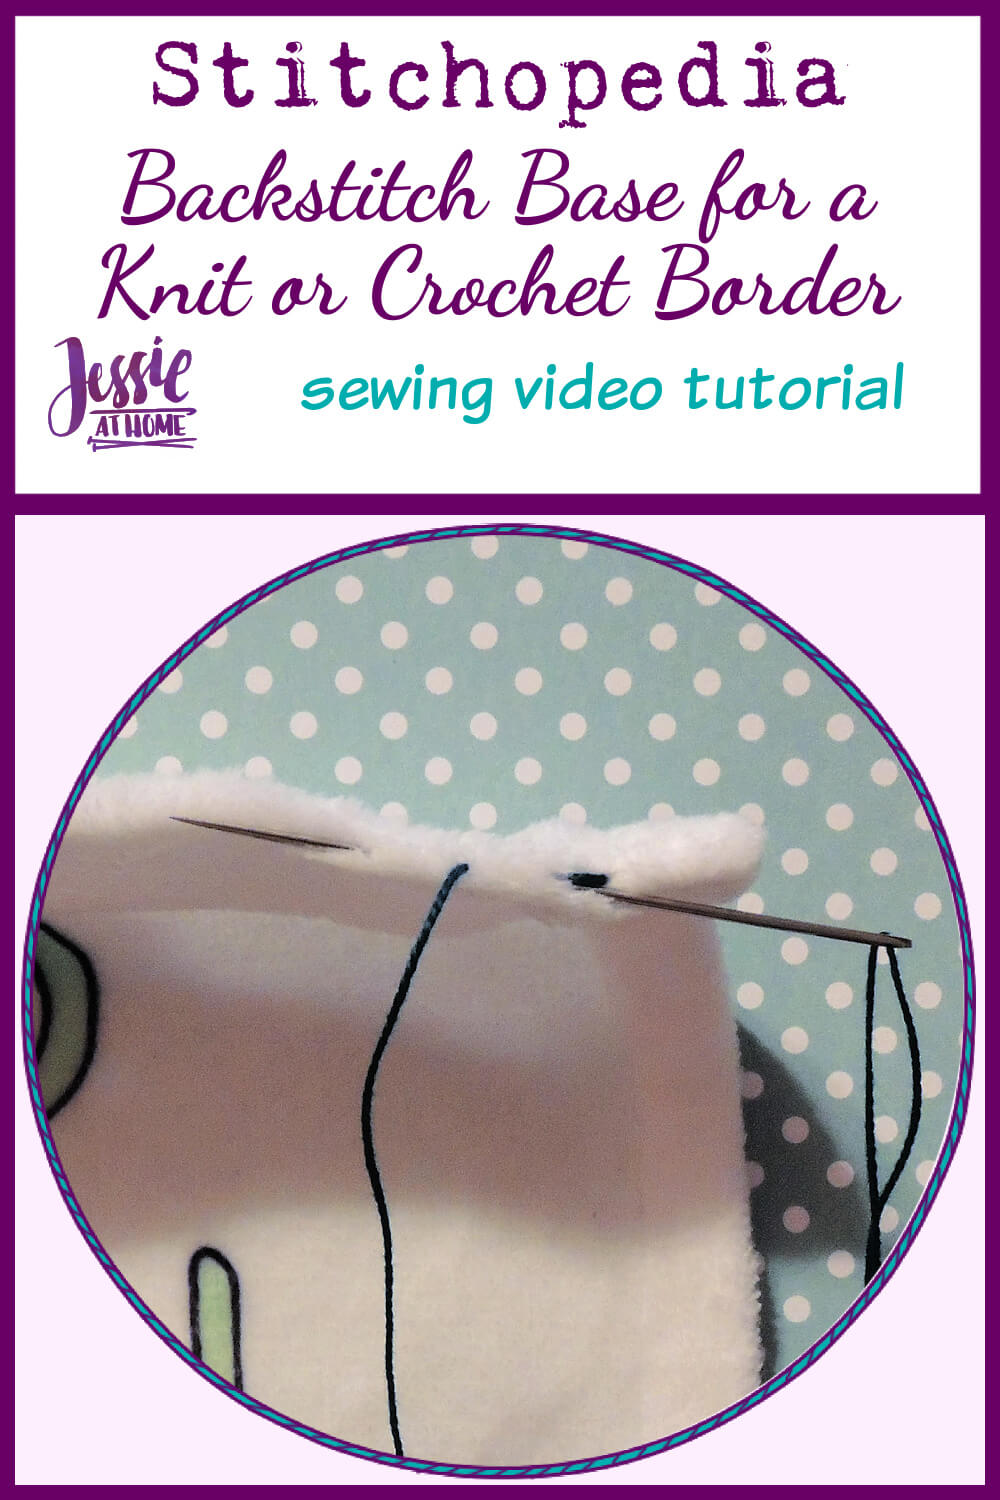 Backstitch Base for a Knit or Crochet Border on Fabric